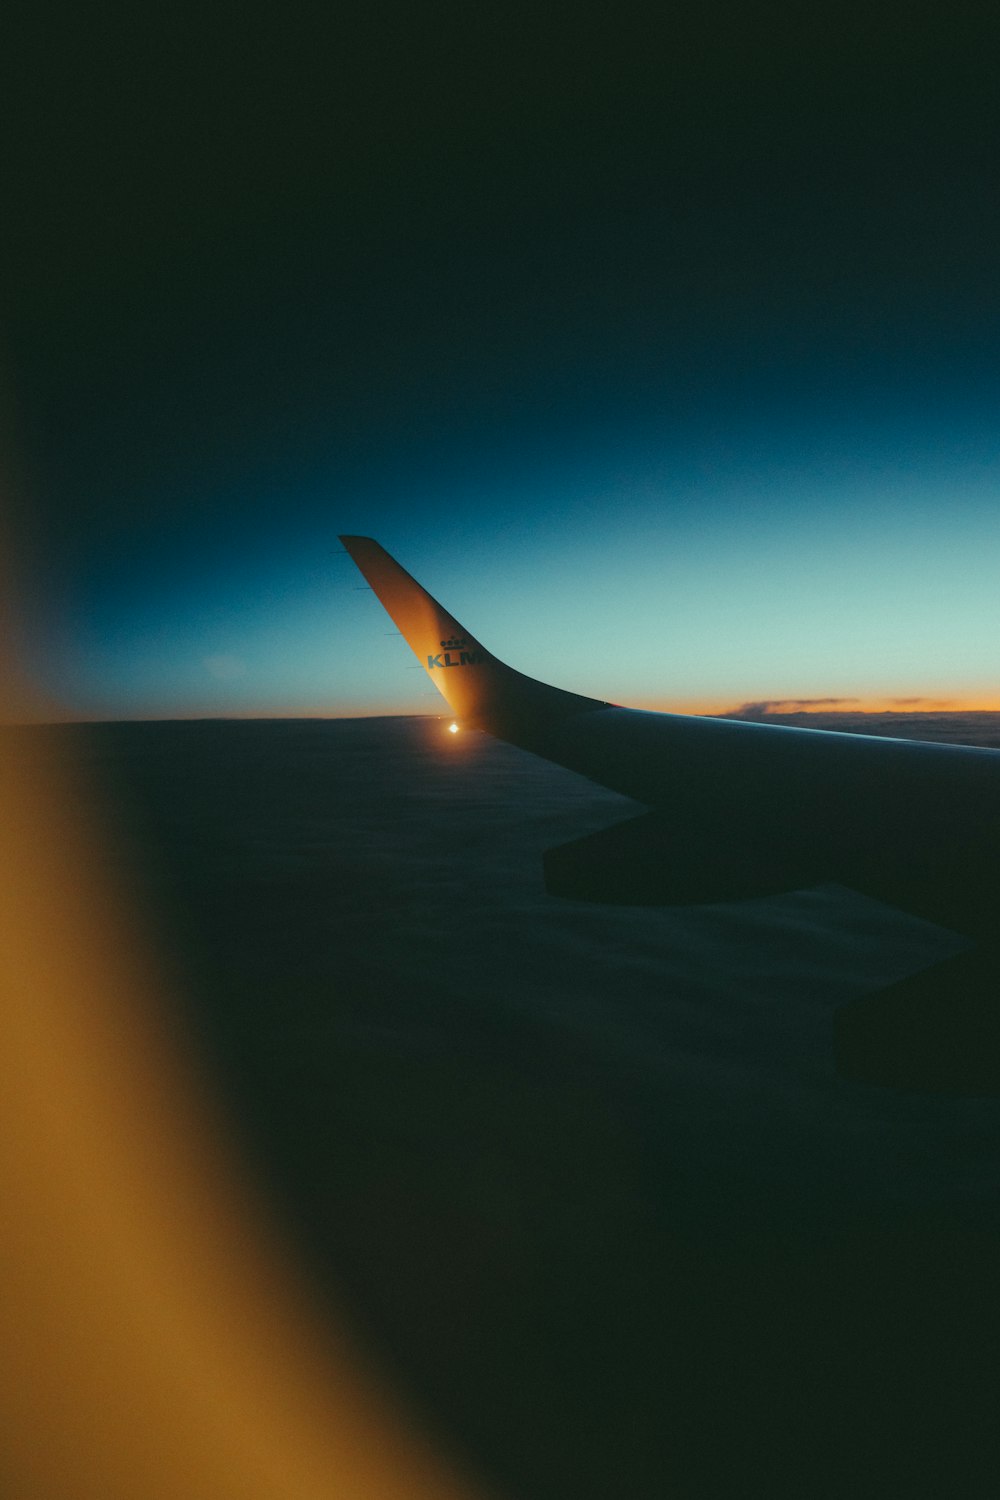 a view of the wing of an airplane at dusk